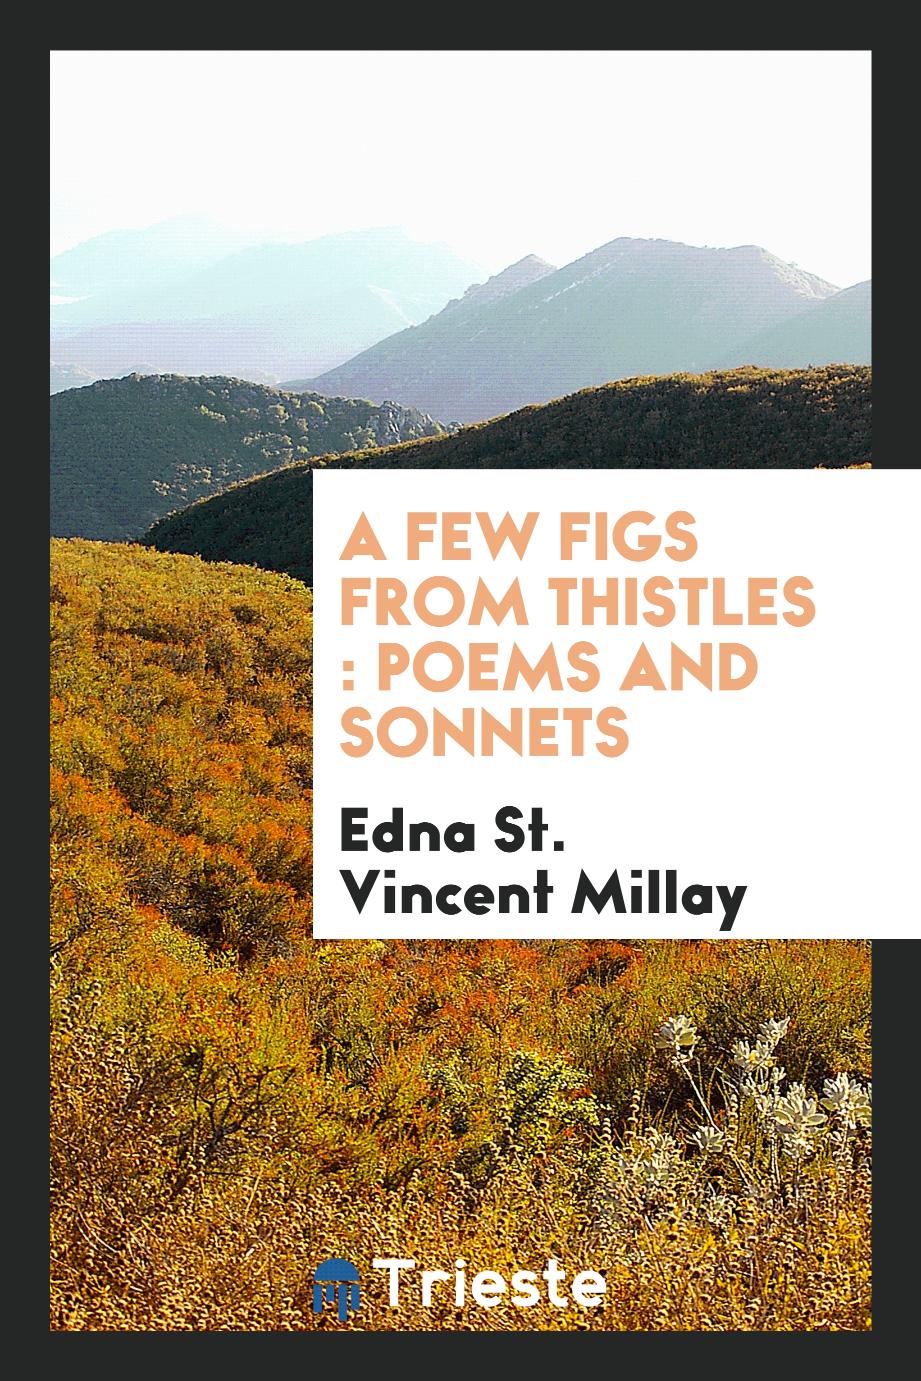 A few figs from thistles : poems and sonnets